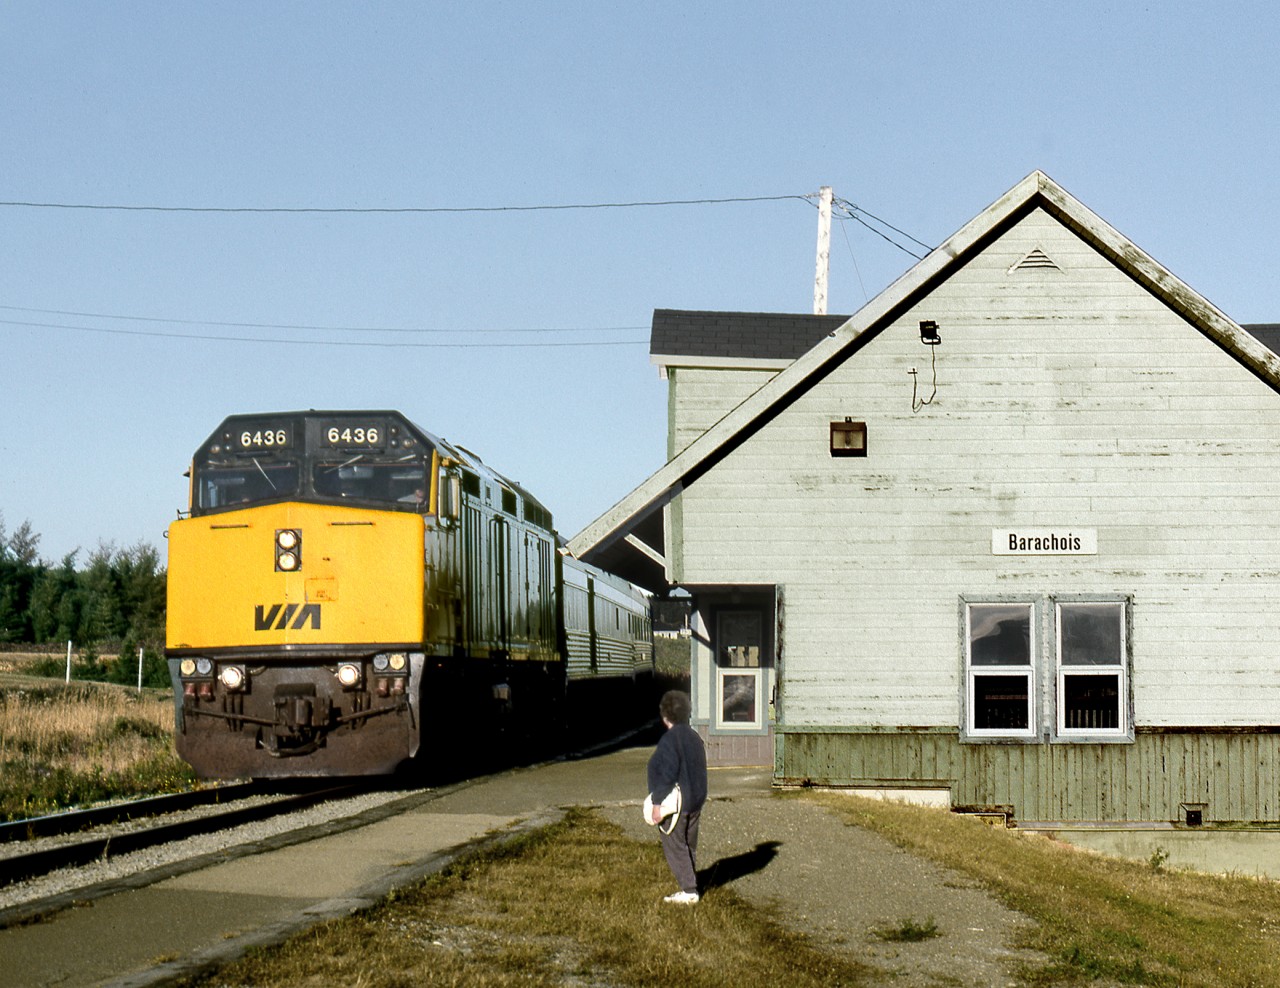 Via's eastbound "Chaleur" pulls into the station at Barachois, while someone waits for an detraining passenger